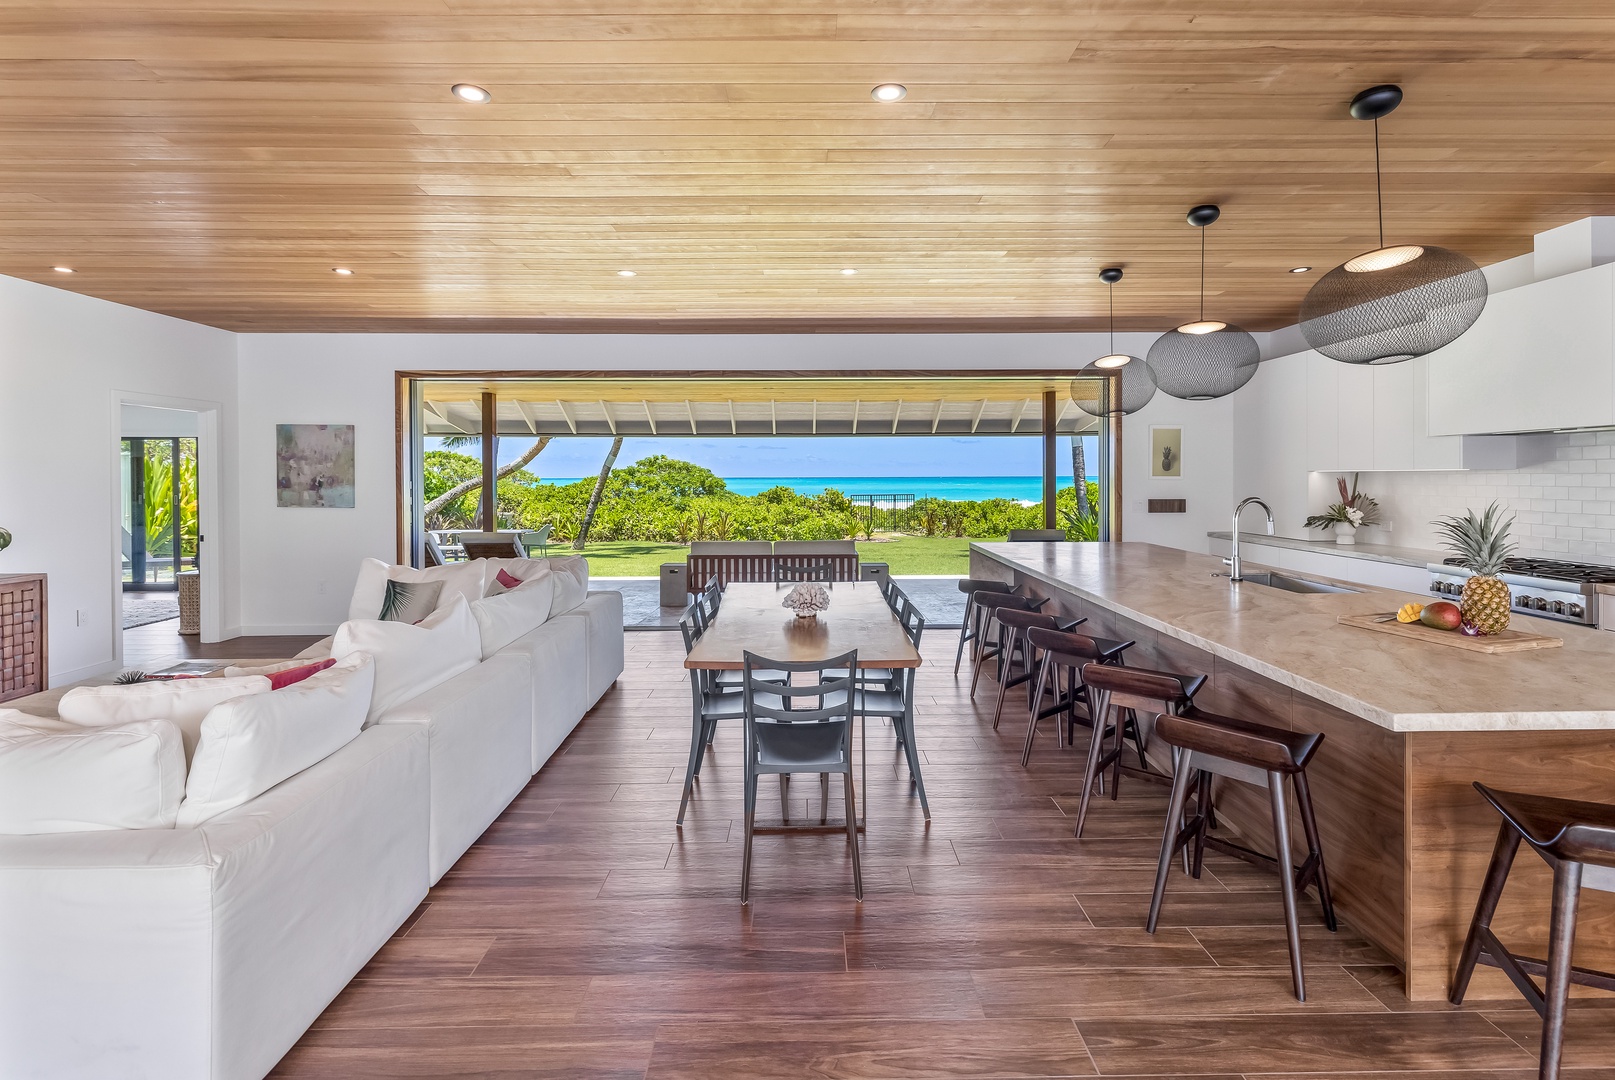 Kailua Vacation Rentals, Kailua Beach Villa - Dine in style with seating for eight at the spacious table.